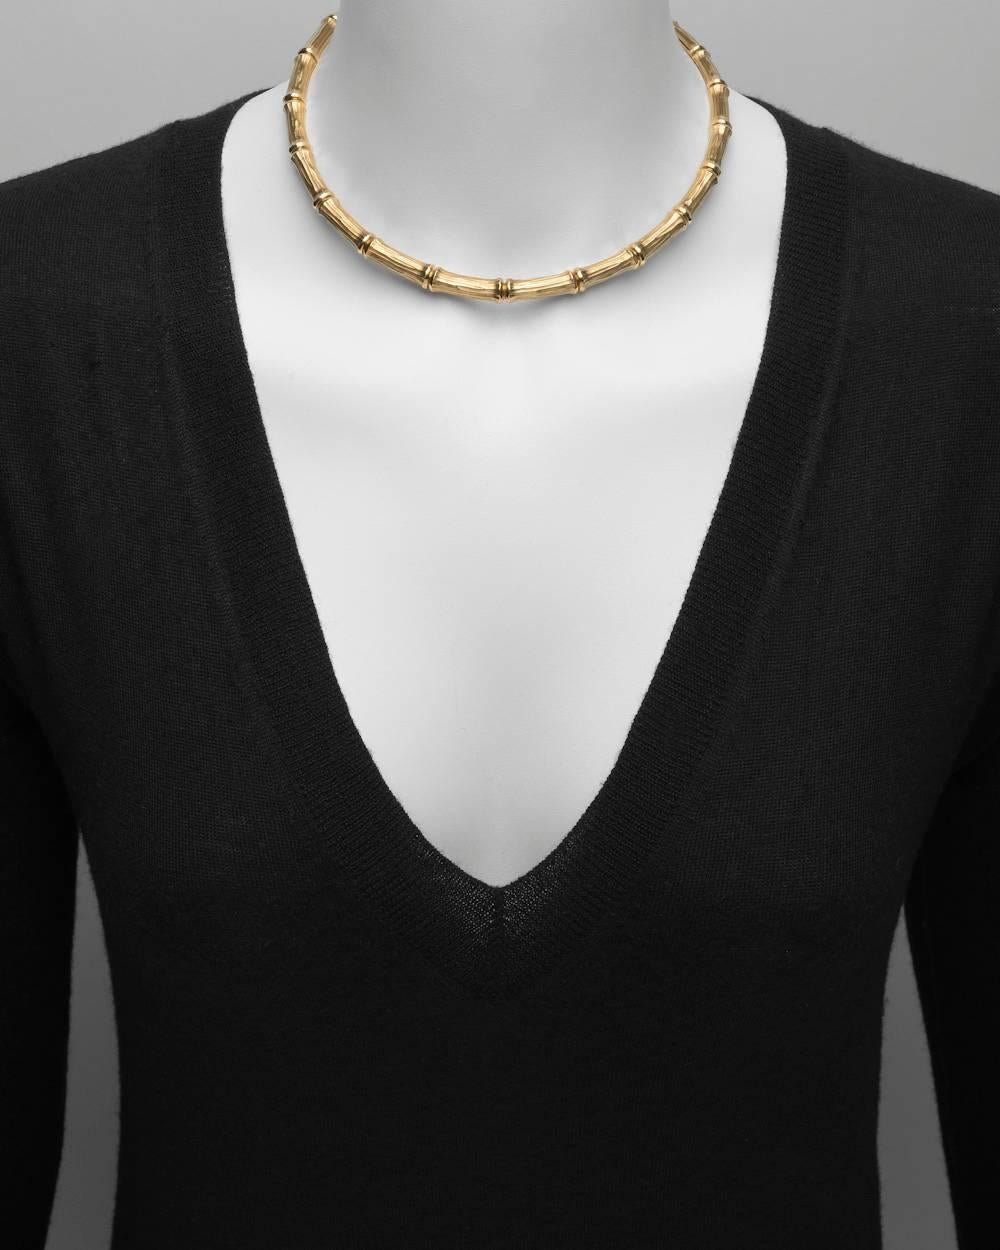 "Bamboo" motif link collar necklace in 18k yellow gold, numbered 709078, signed Cartier. 15.5" approximate length.
